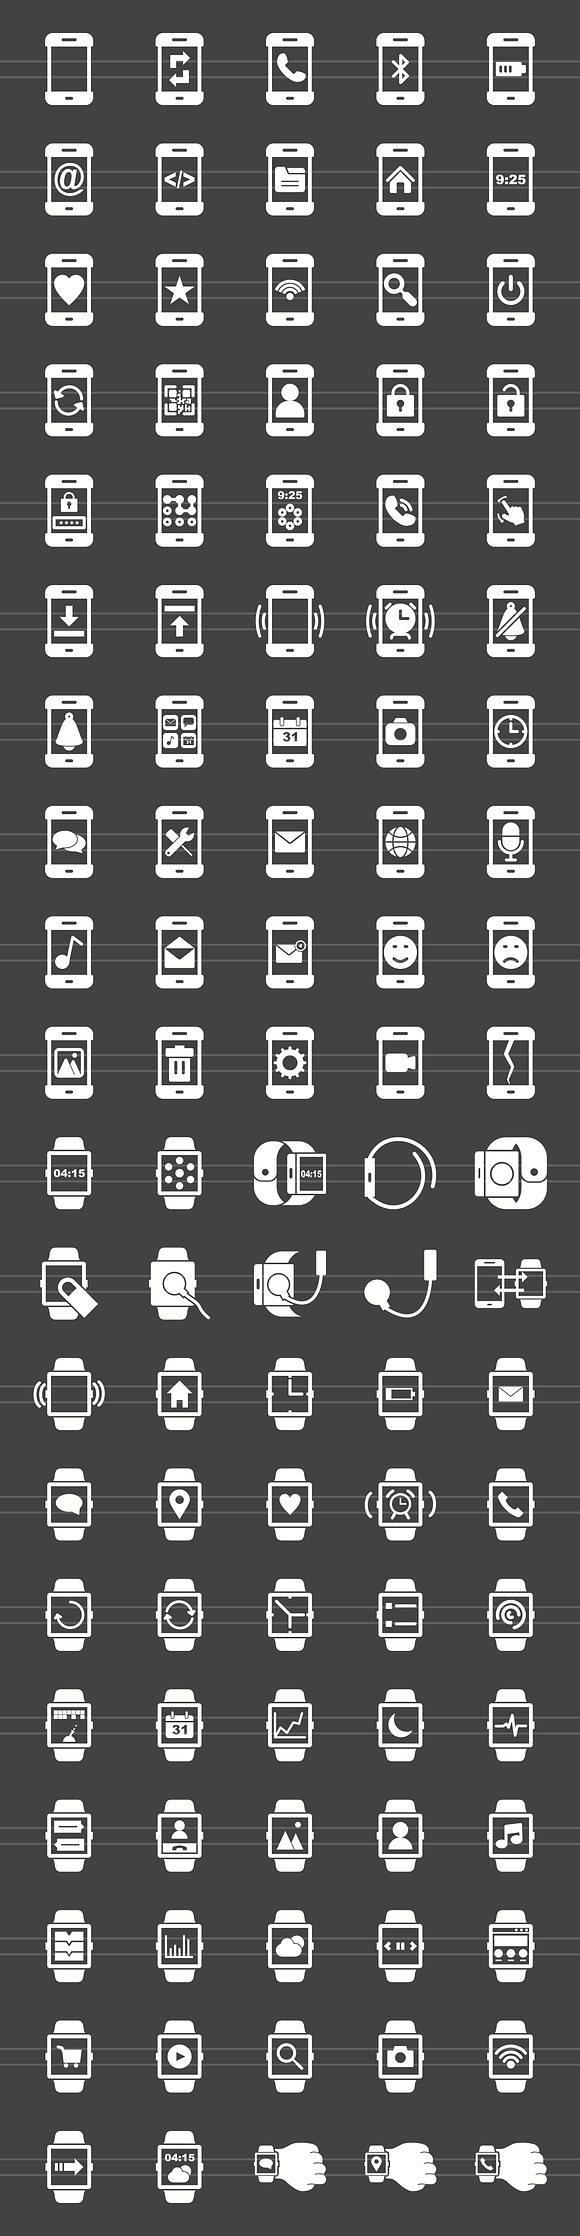 100 Smartphone & Watch Glyph Icons in Graphics - product preview 1